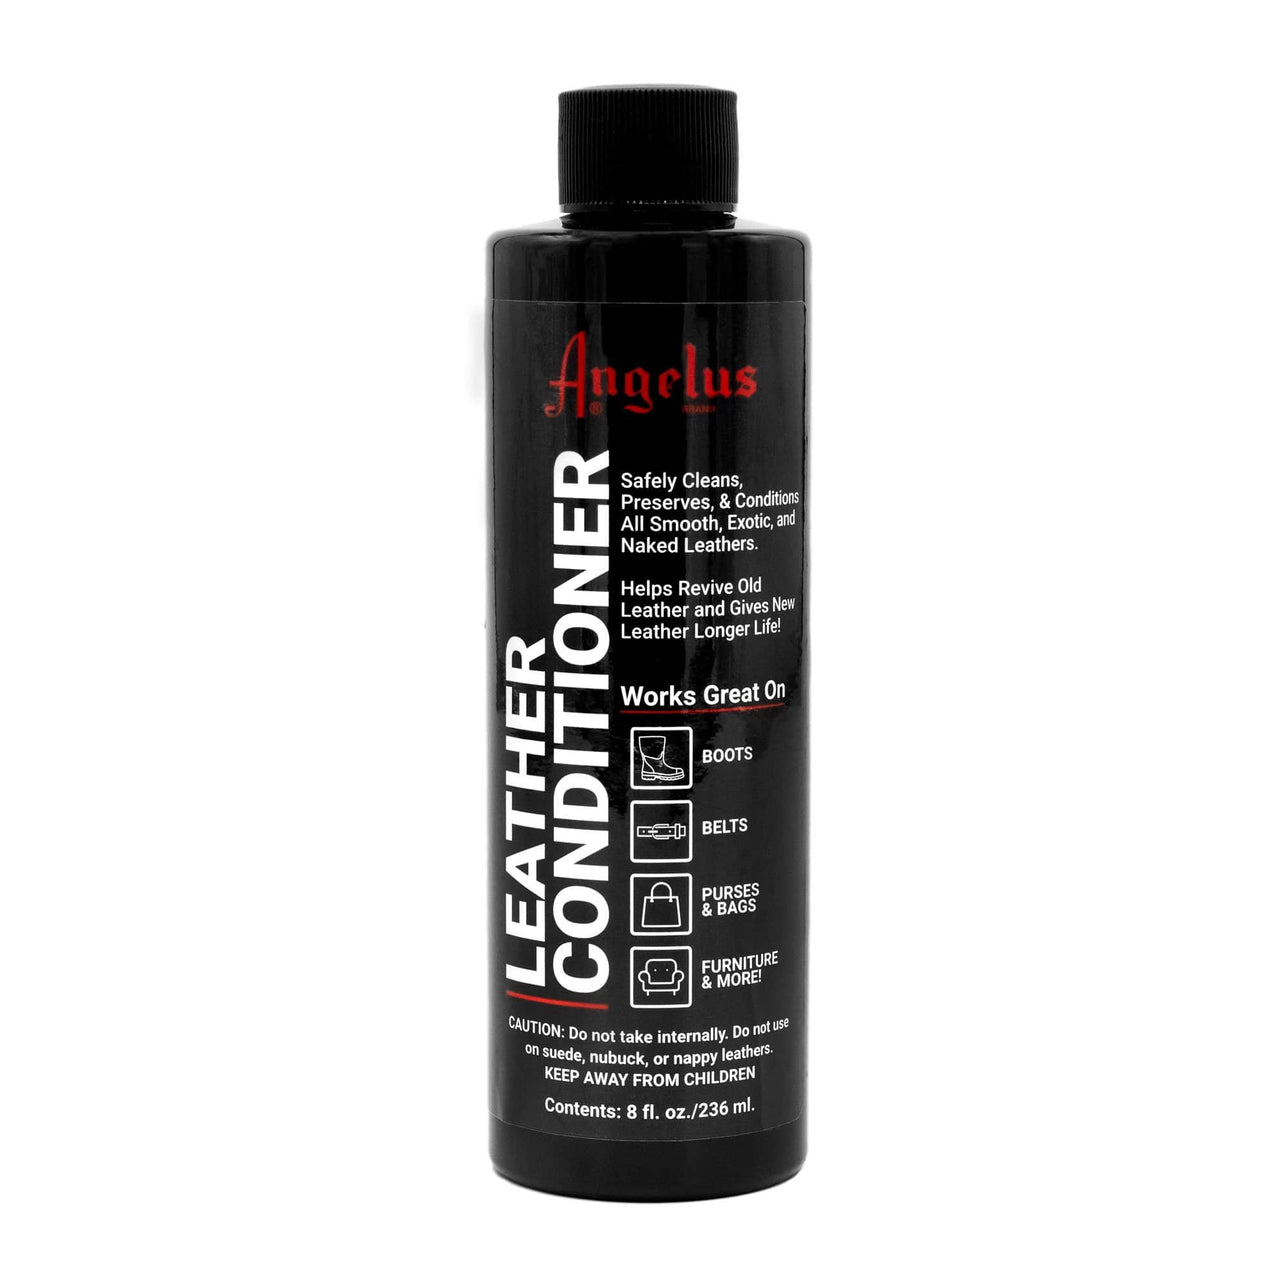 Angelus Leather Conditioner For Boots - yeehawcowboy